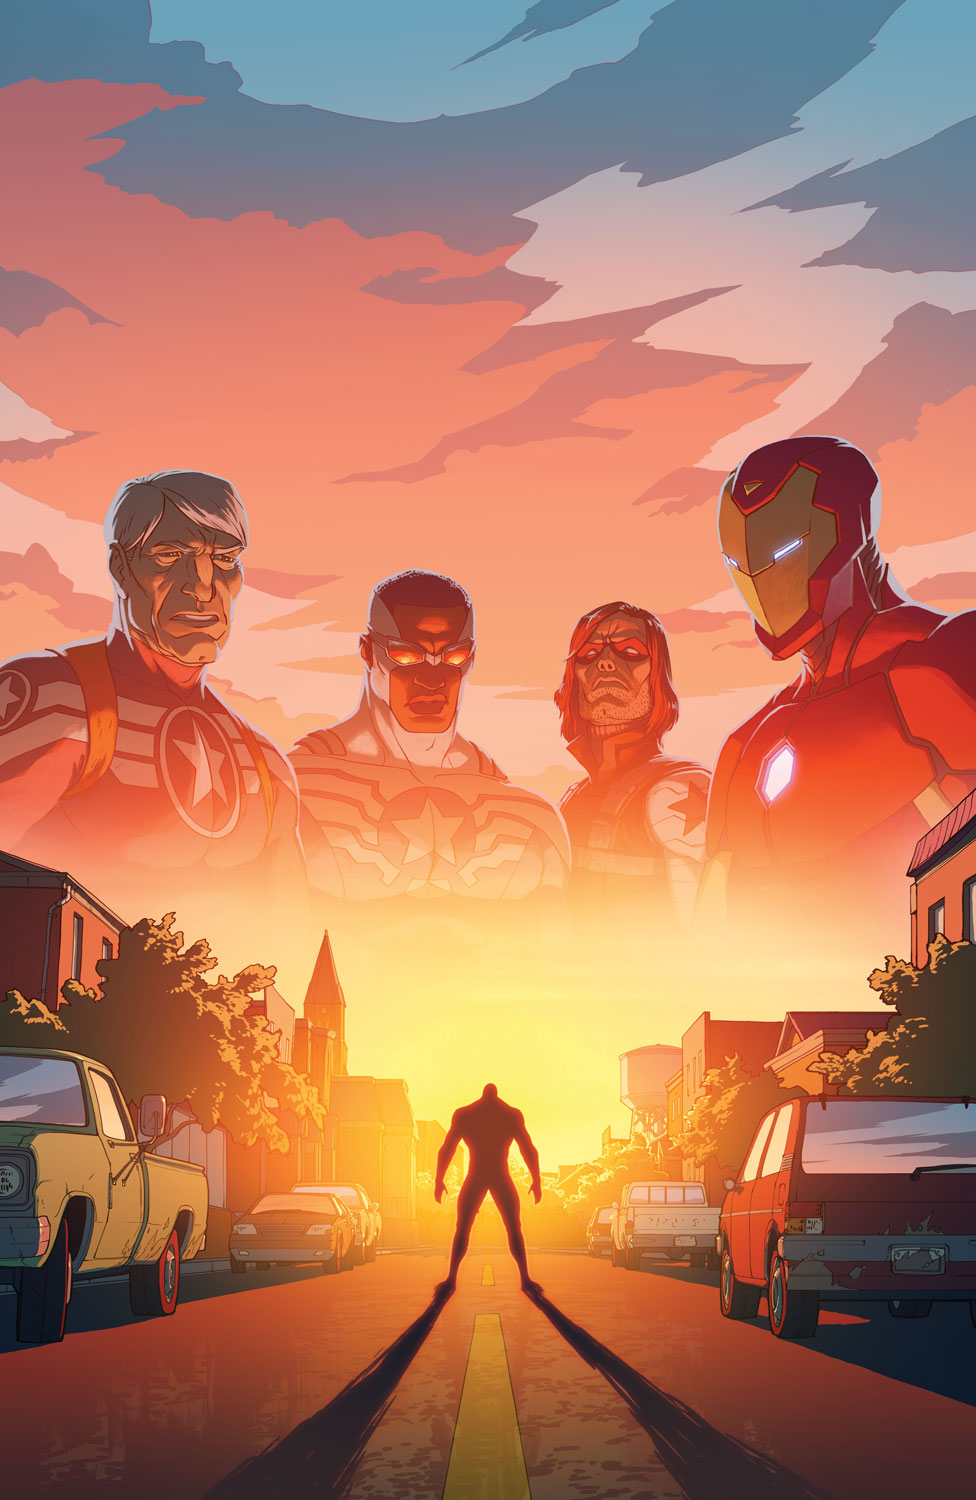 Avengers Standoff: Welcome to Pleasant Hill #1 Cover